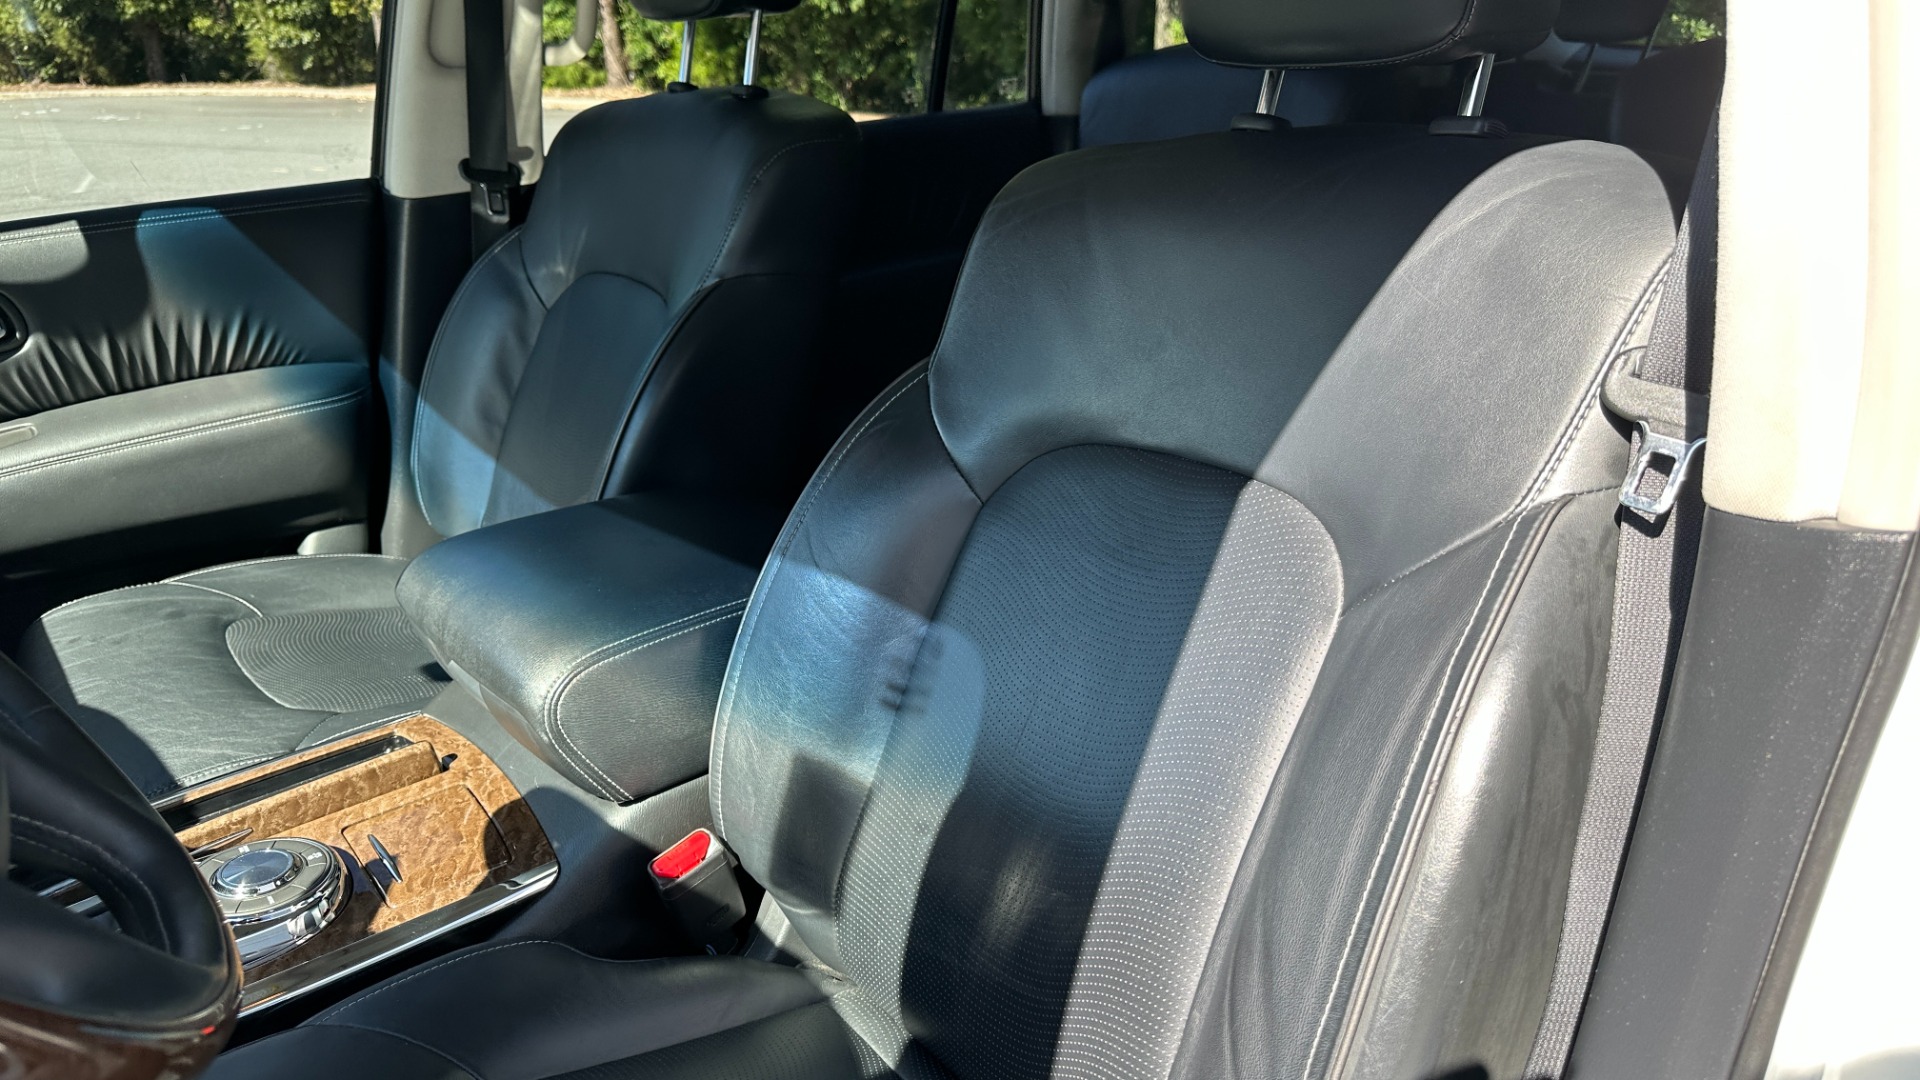 Used 2017 INFINITI QX80 SIGNATURE EDITION / 3 ROW SEATING / NAV / LEATHER for sale $25,995 at Formula Imports in Charlotte NC 28227 13